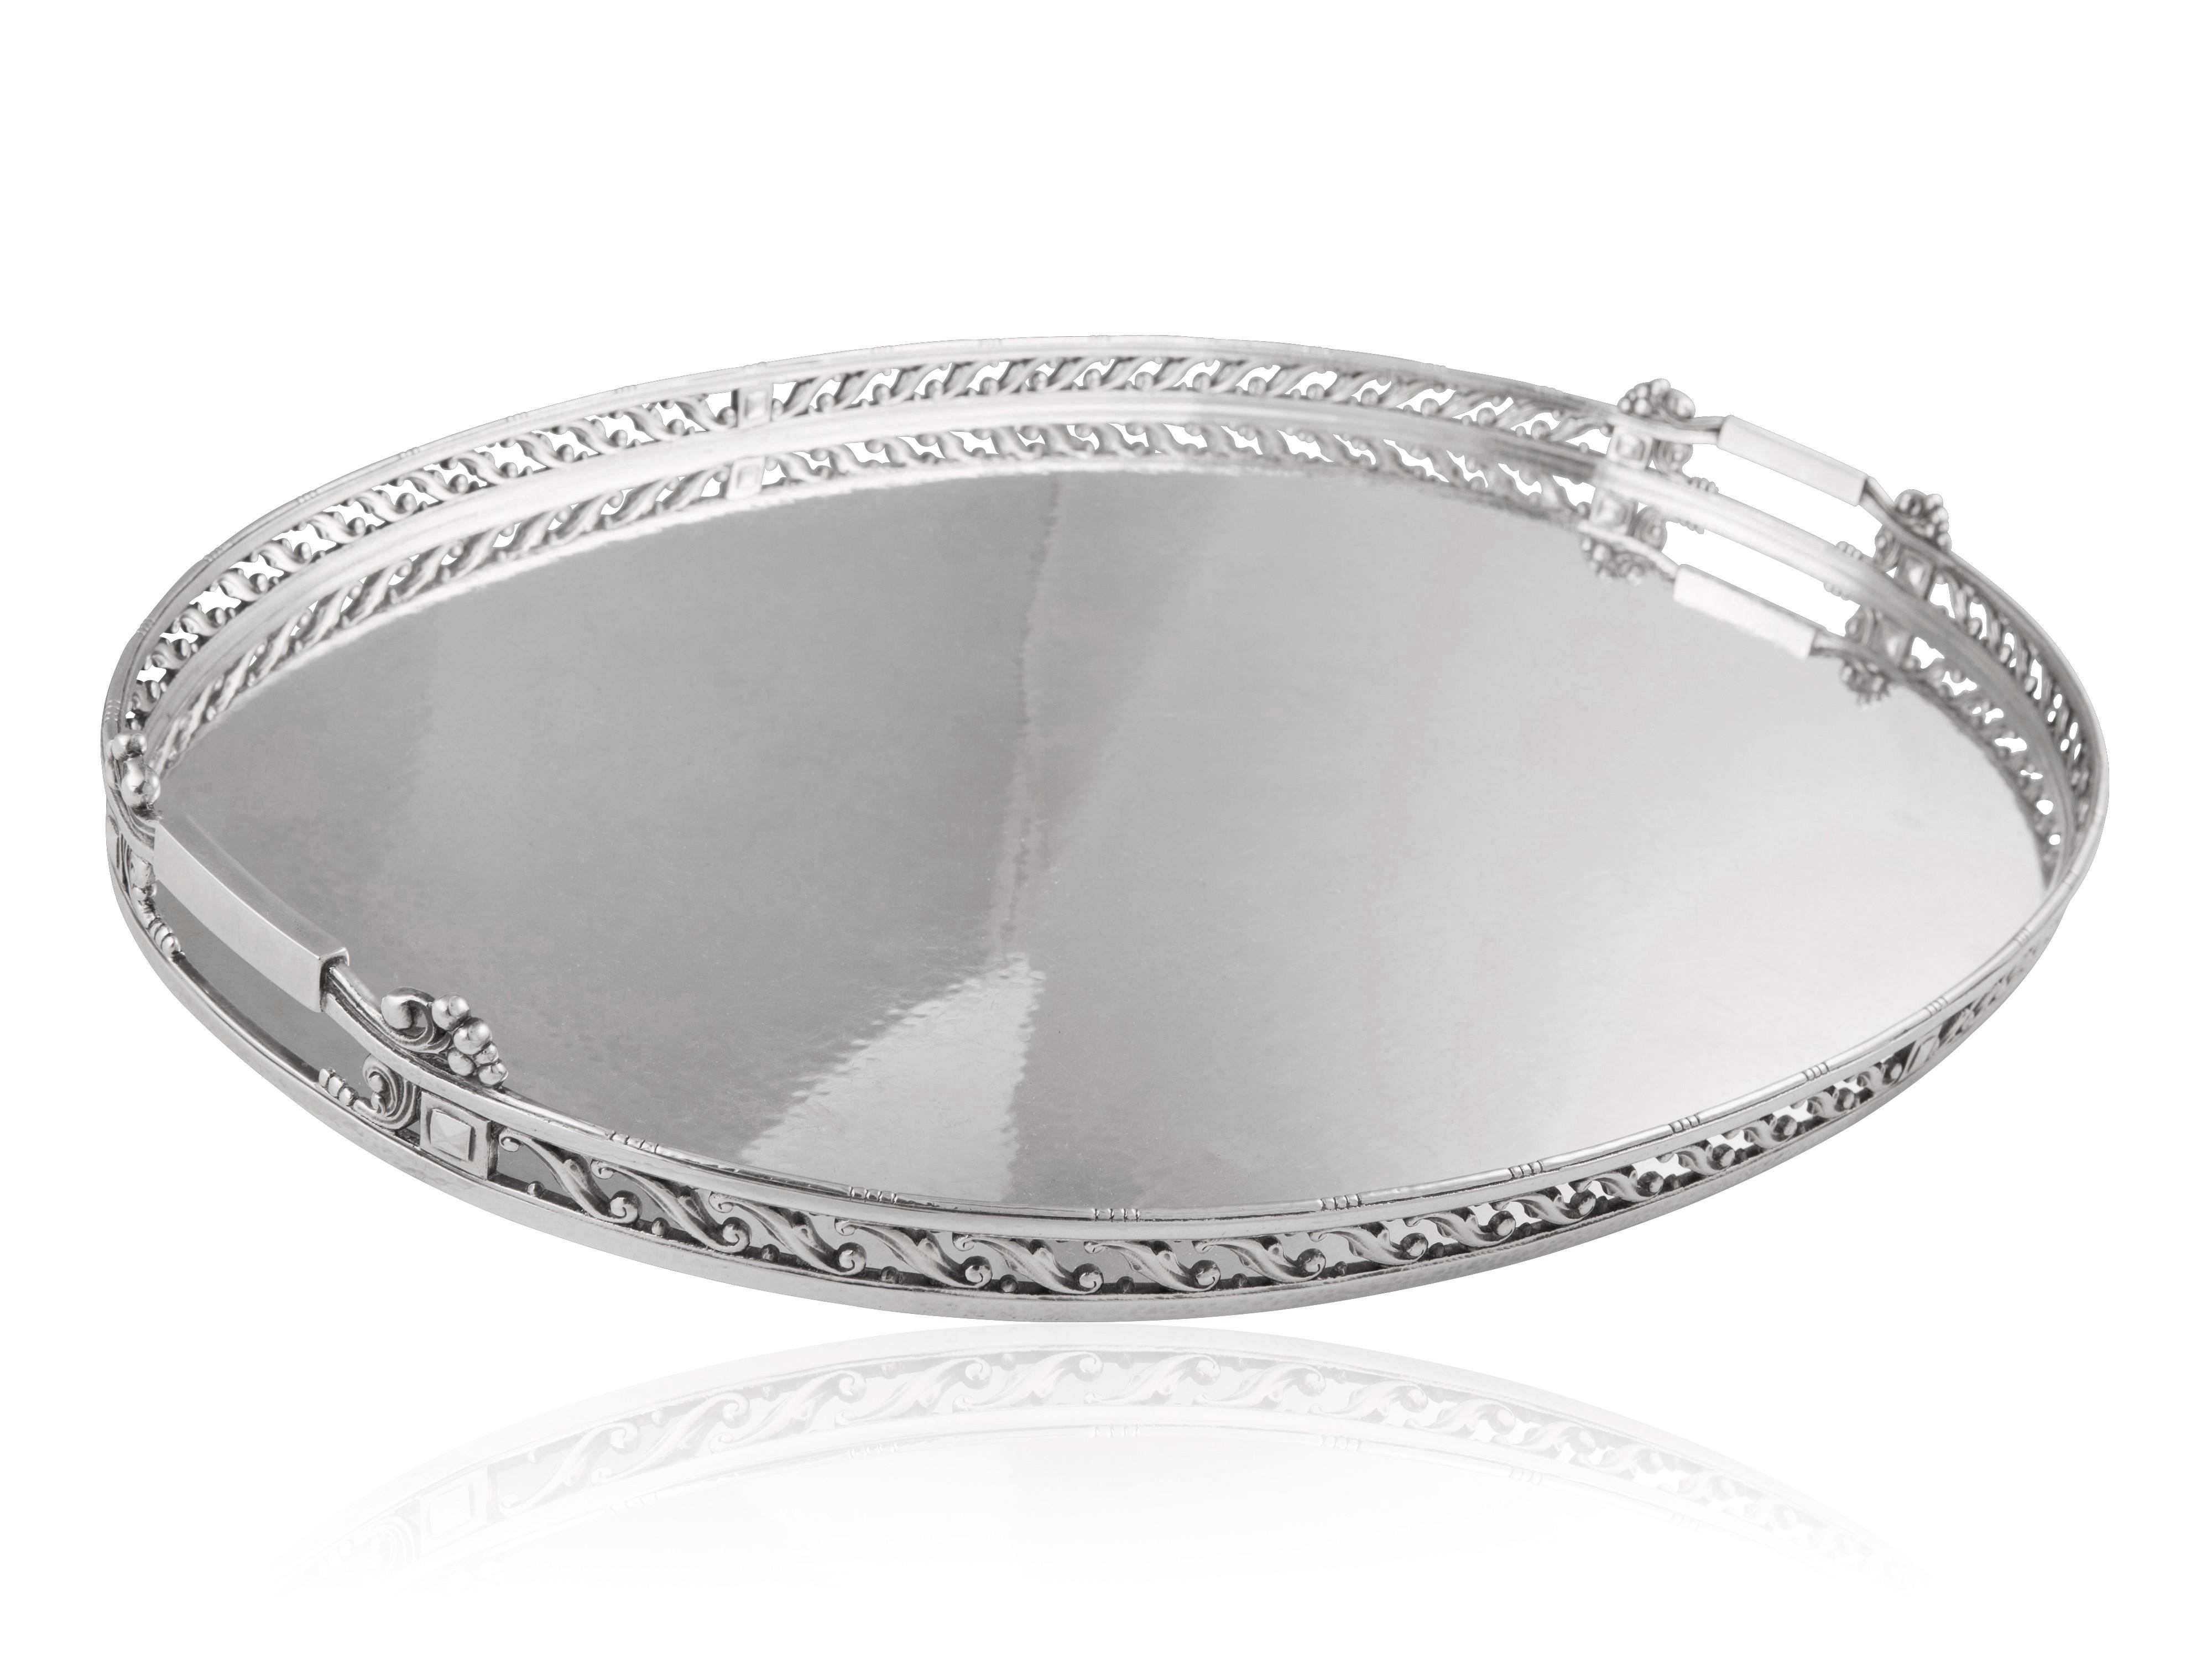 An exceptionally rare sterling silver tray from Georg Jensen, this piece showcases the distinctive design #332B by Johan Rohde, dating back to 1919. Often referred to as the “bridge tray,” this large oval tray is meticulously handcrafted. Noteworthy